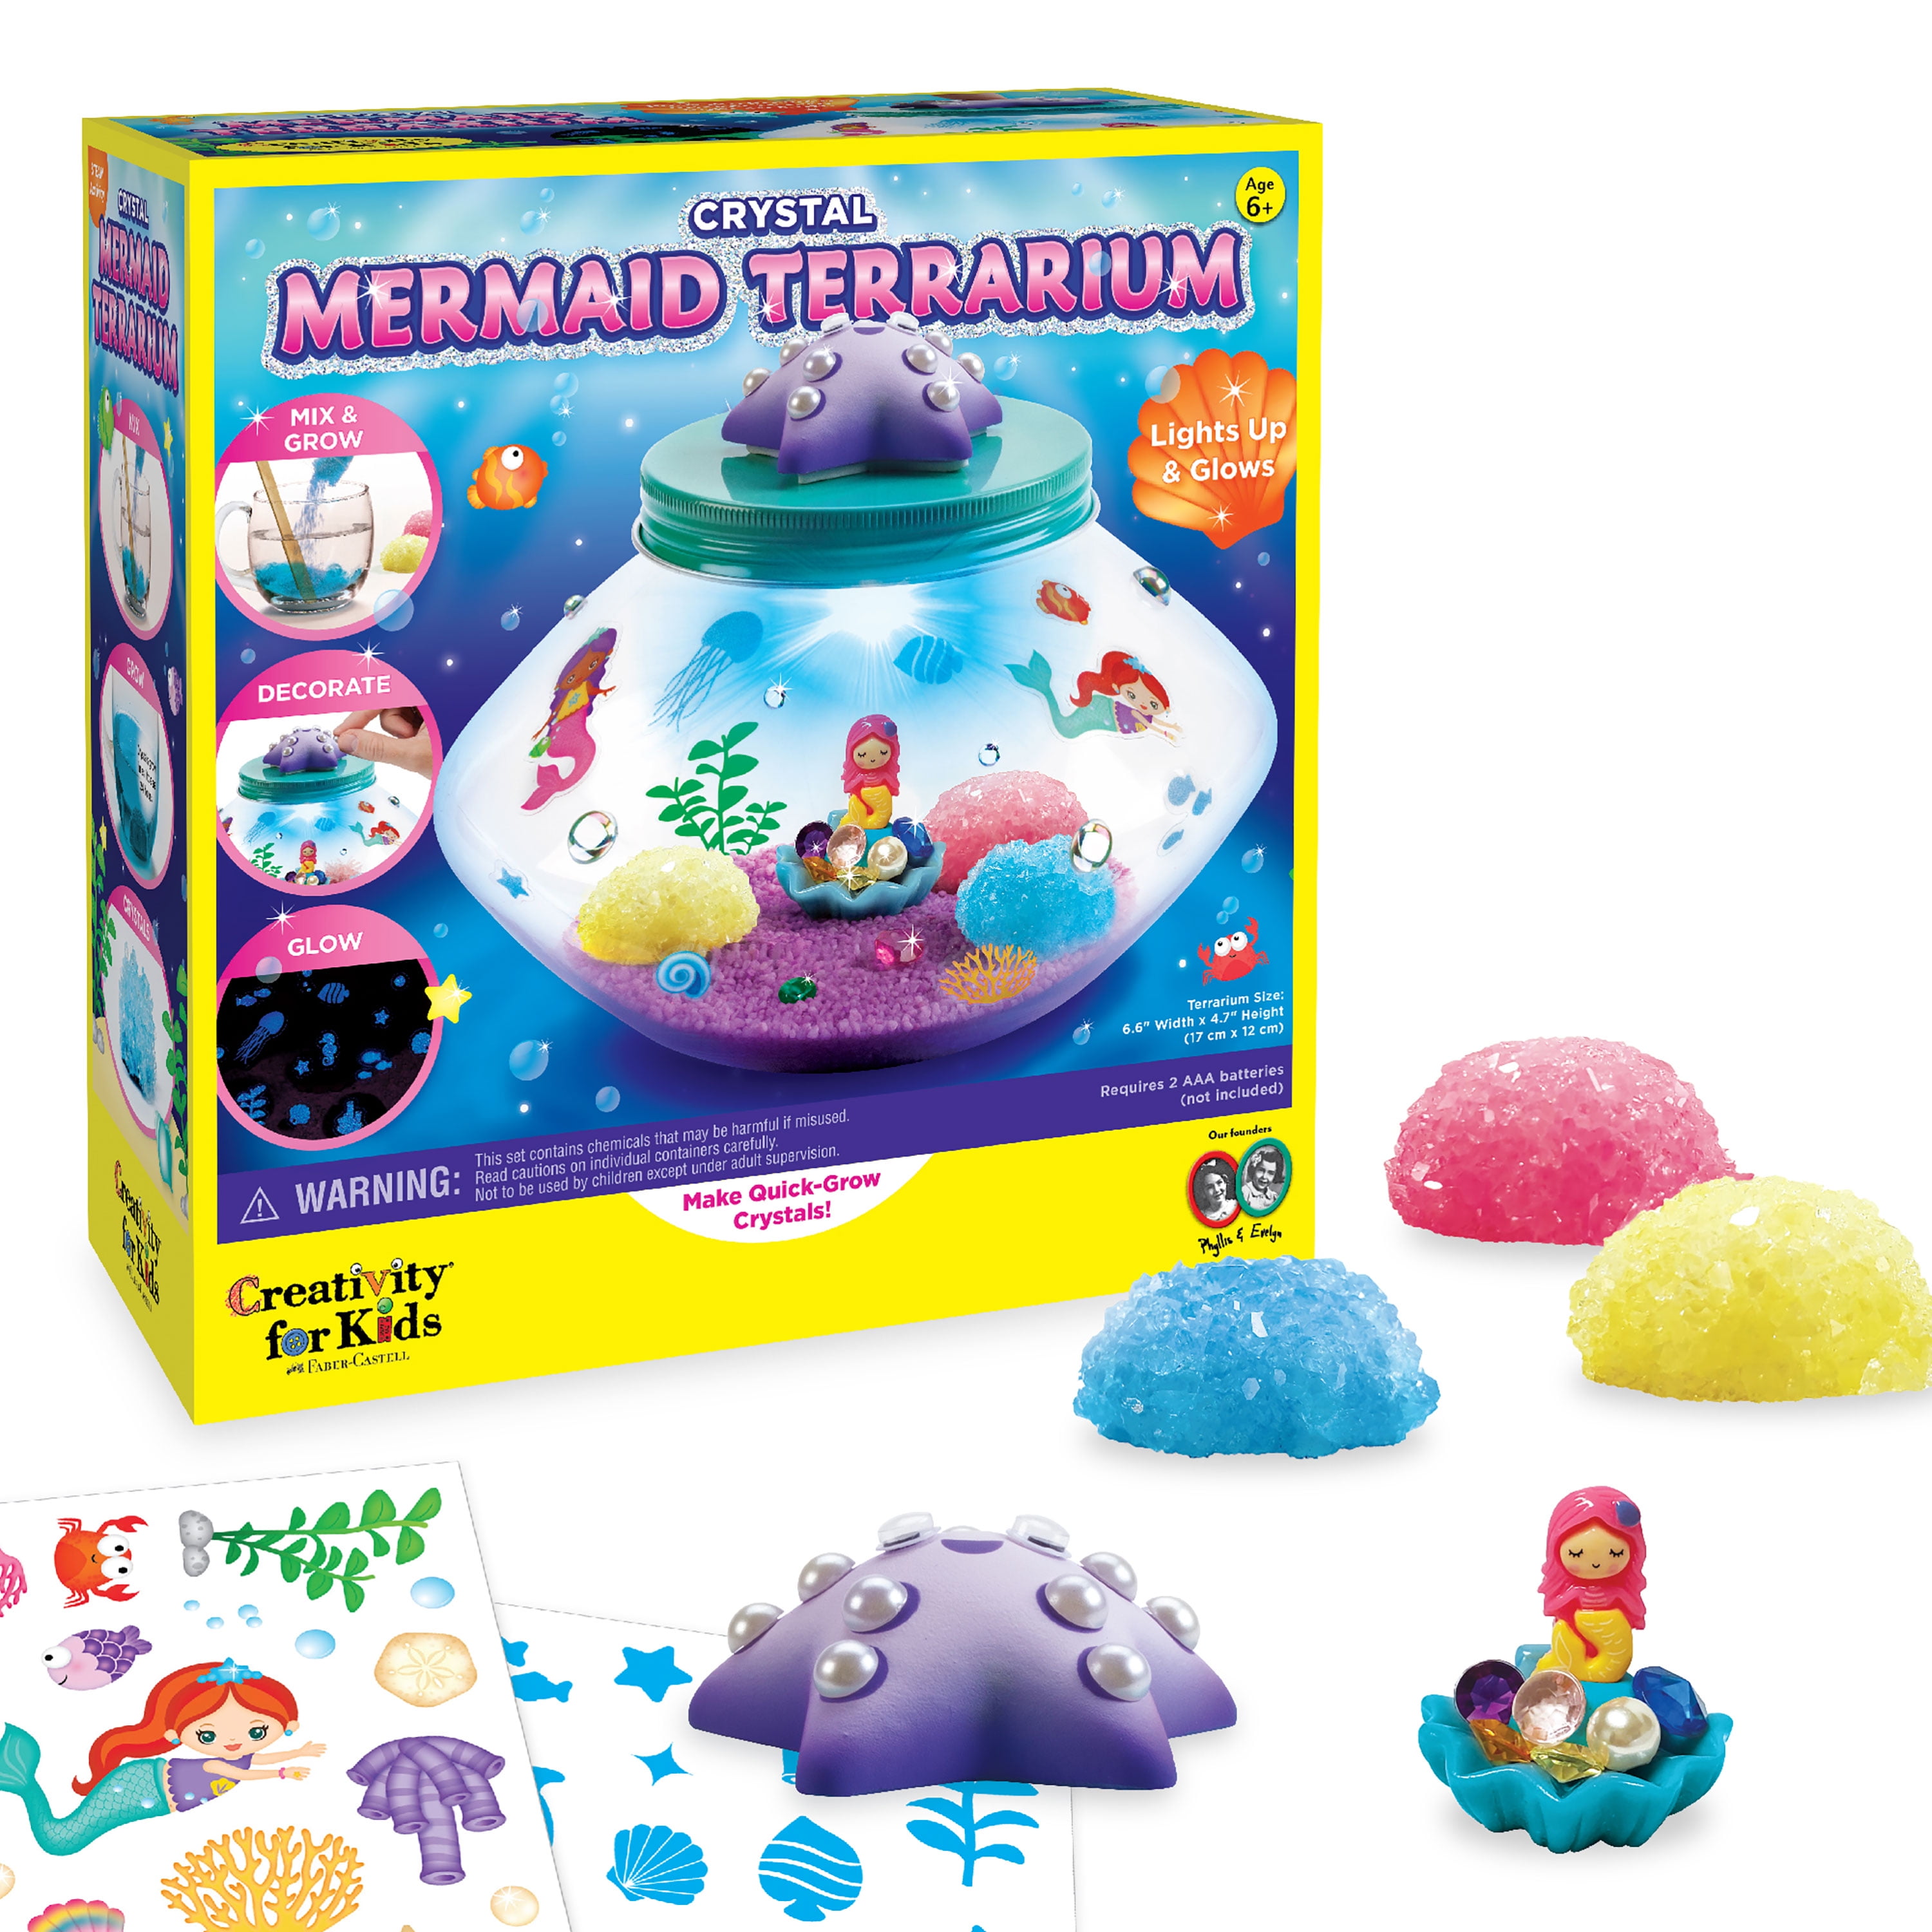 CRYSTAL GROWING KIT GROW YOUR OWN TOY BOY GIRL SCIENCE BIRTHDAY PARTY BAG FILLER 